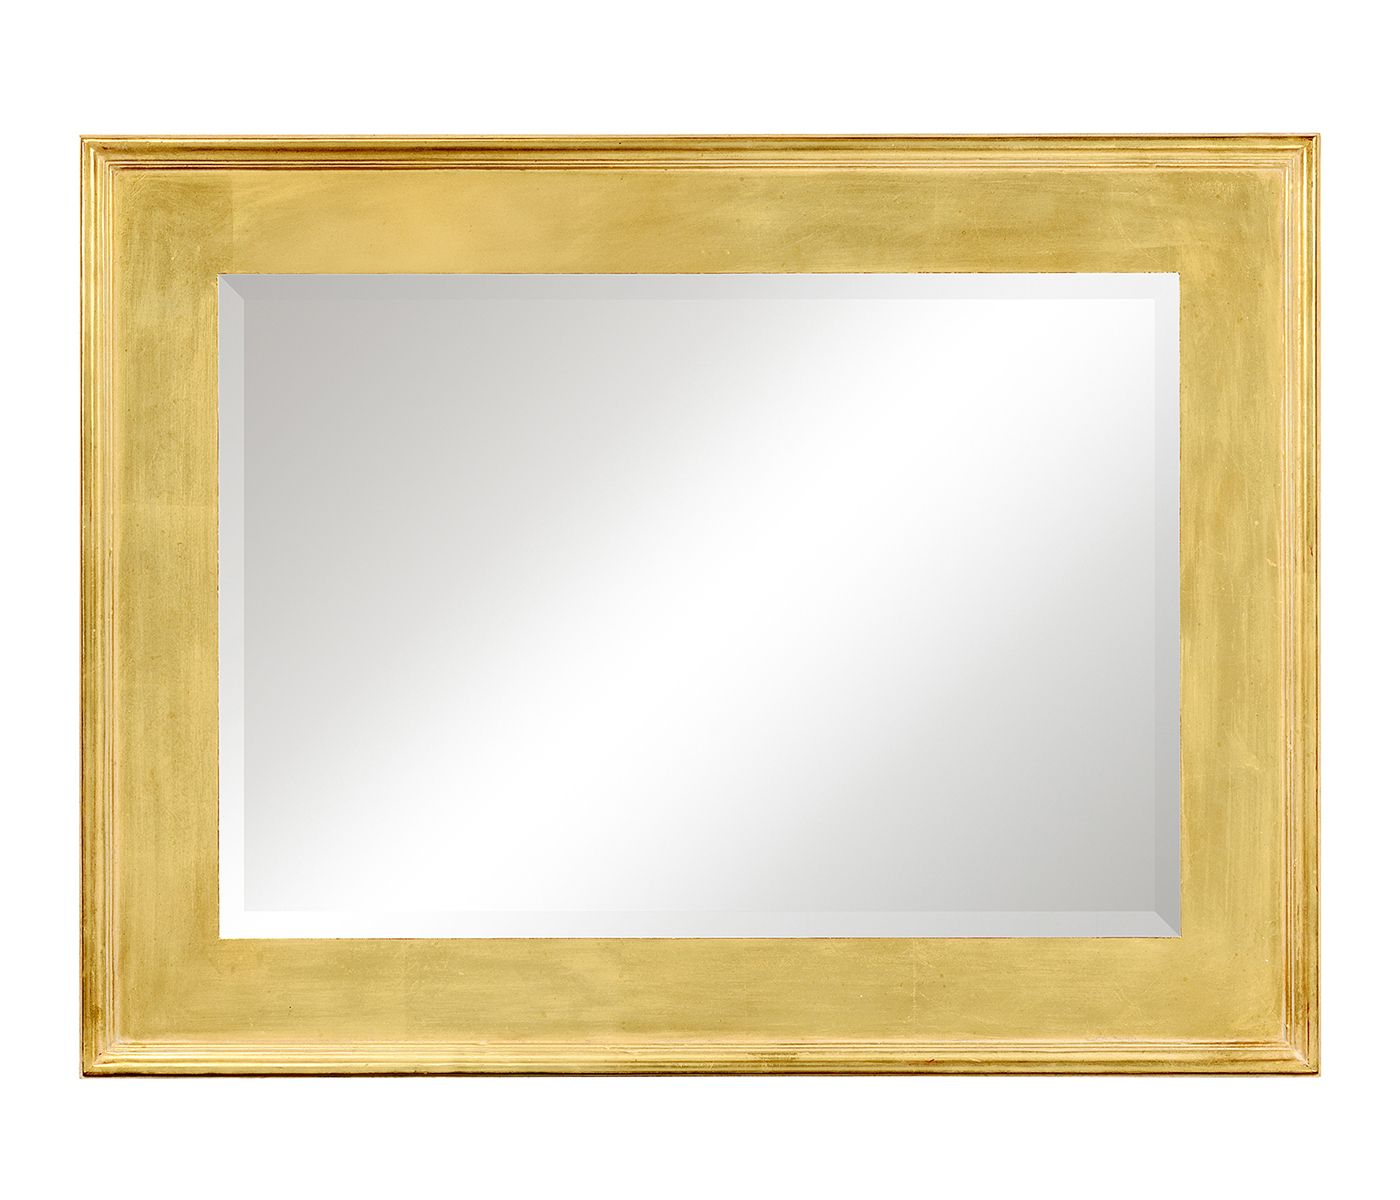 Rectangular Gold Leaf Mirror Inside Farmhouse Woodgrain And Leaf Accent Wall Mirrors (View 15 of 15)